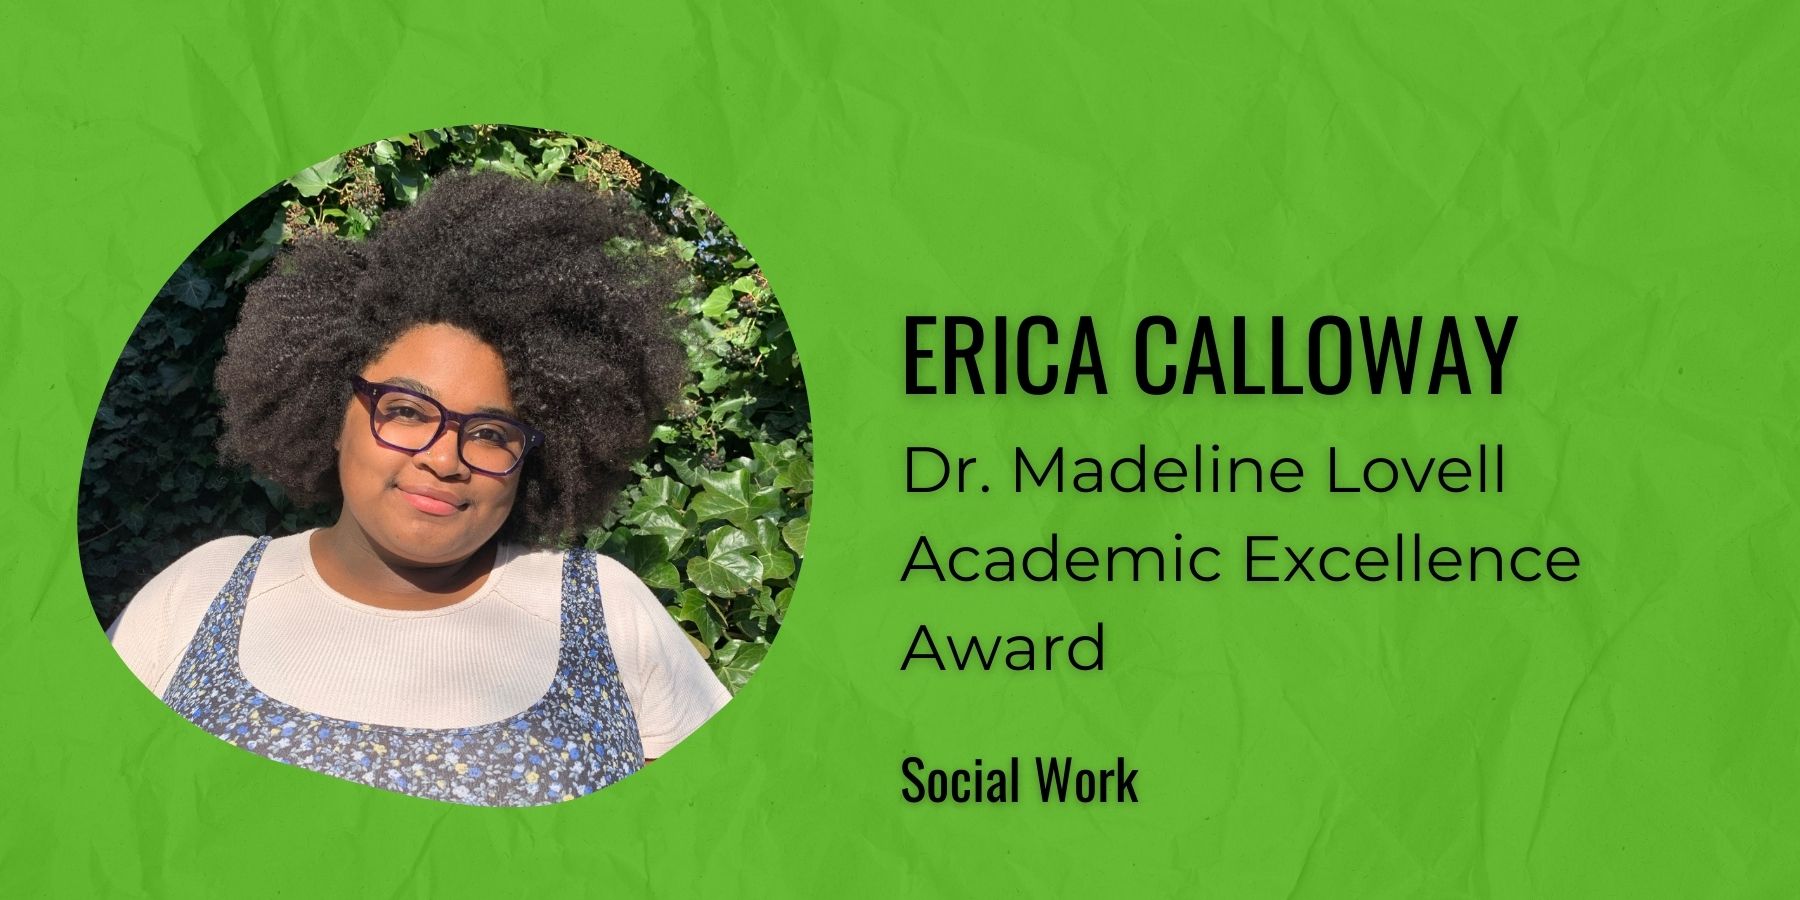 Image of Erica Calloway with text, Dr. Madeline Lovell Academic Excellence Award, Social Work
